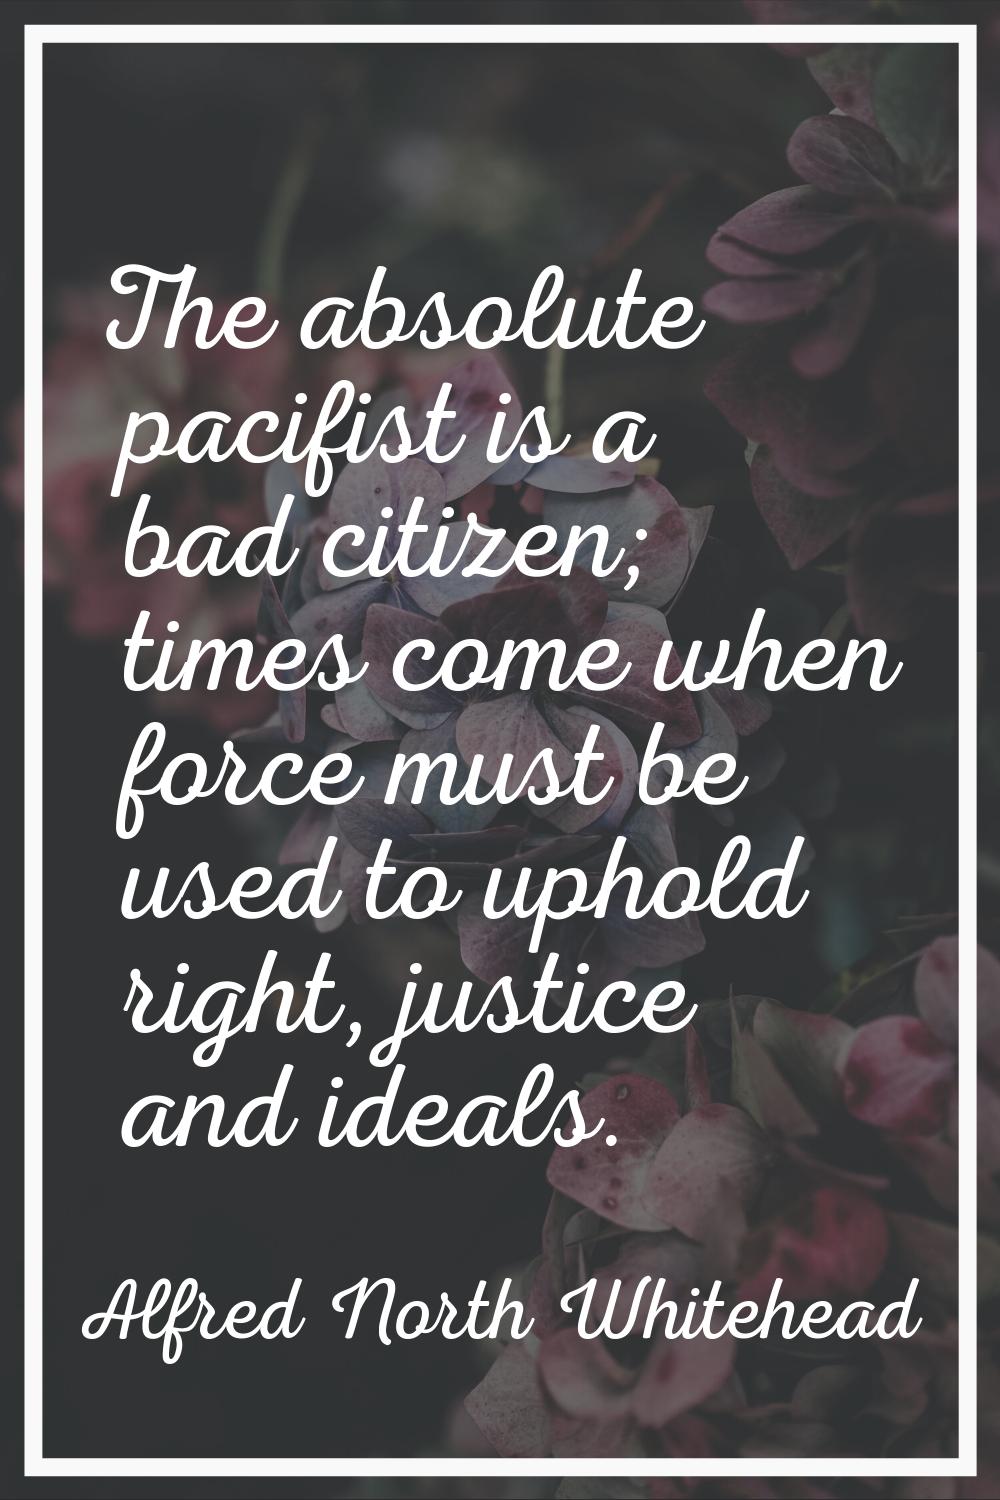 The absolute pacifist is a bad citizen; times come when force must be used to uphold right, justice